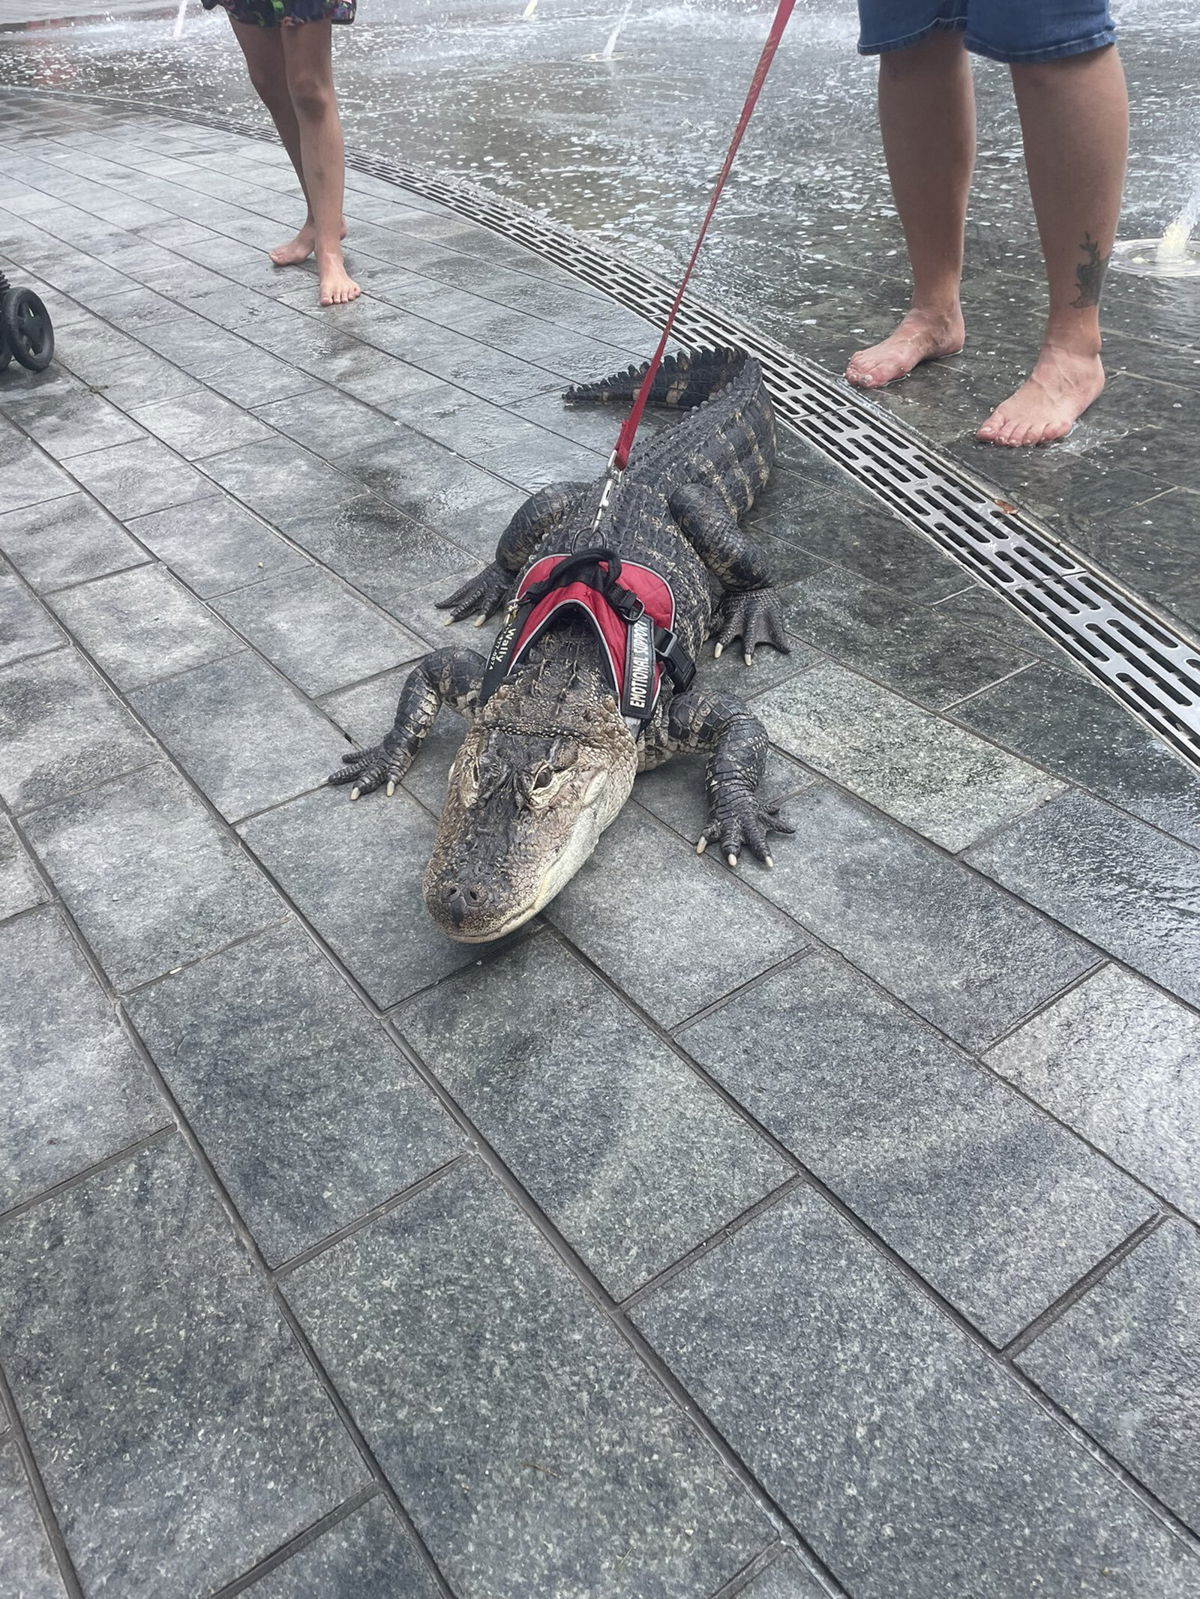 <i>Halle Sivalingam</i><br/>Bystanders had an up-close and personal encounter with an alligator in Philadelphia's Love Park. But the reptile isn't a wild beast: It's the emotional support animal of a Philadelphia man who runs several social media accounts documenting his loving relationship with Wally the alligator.